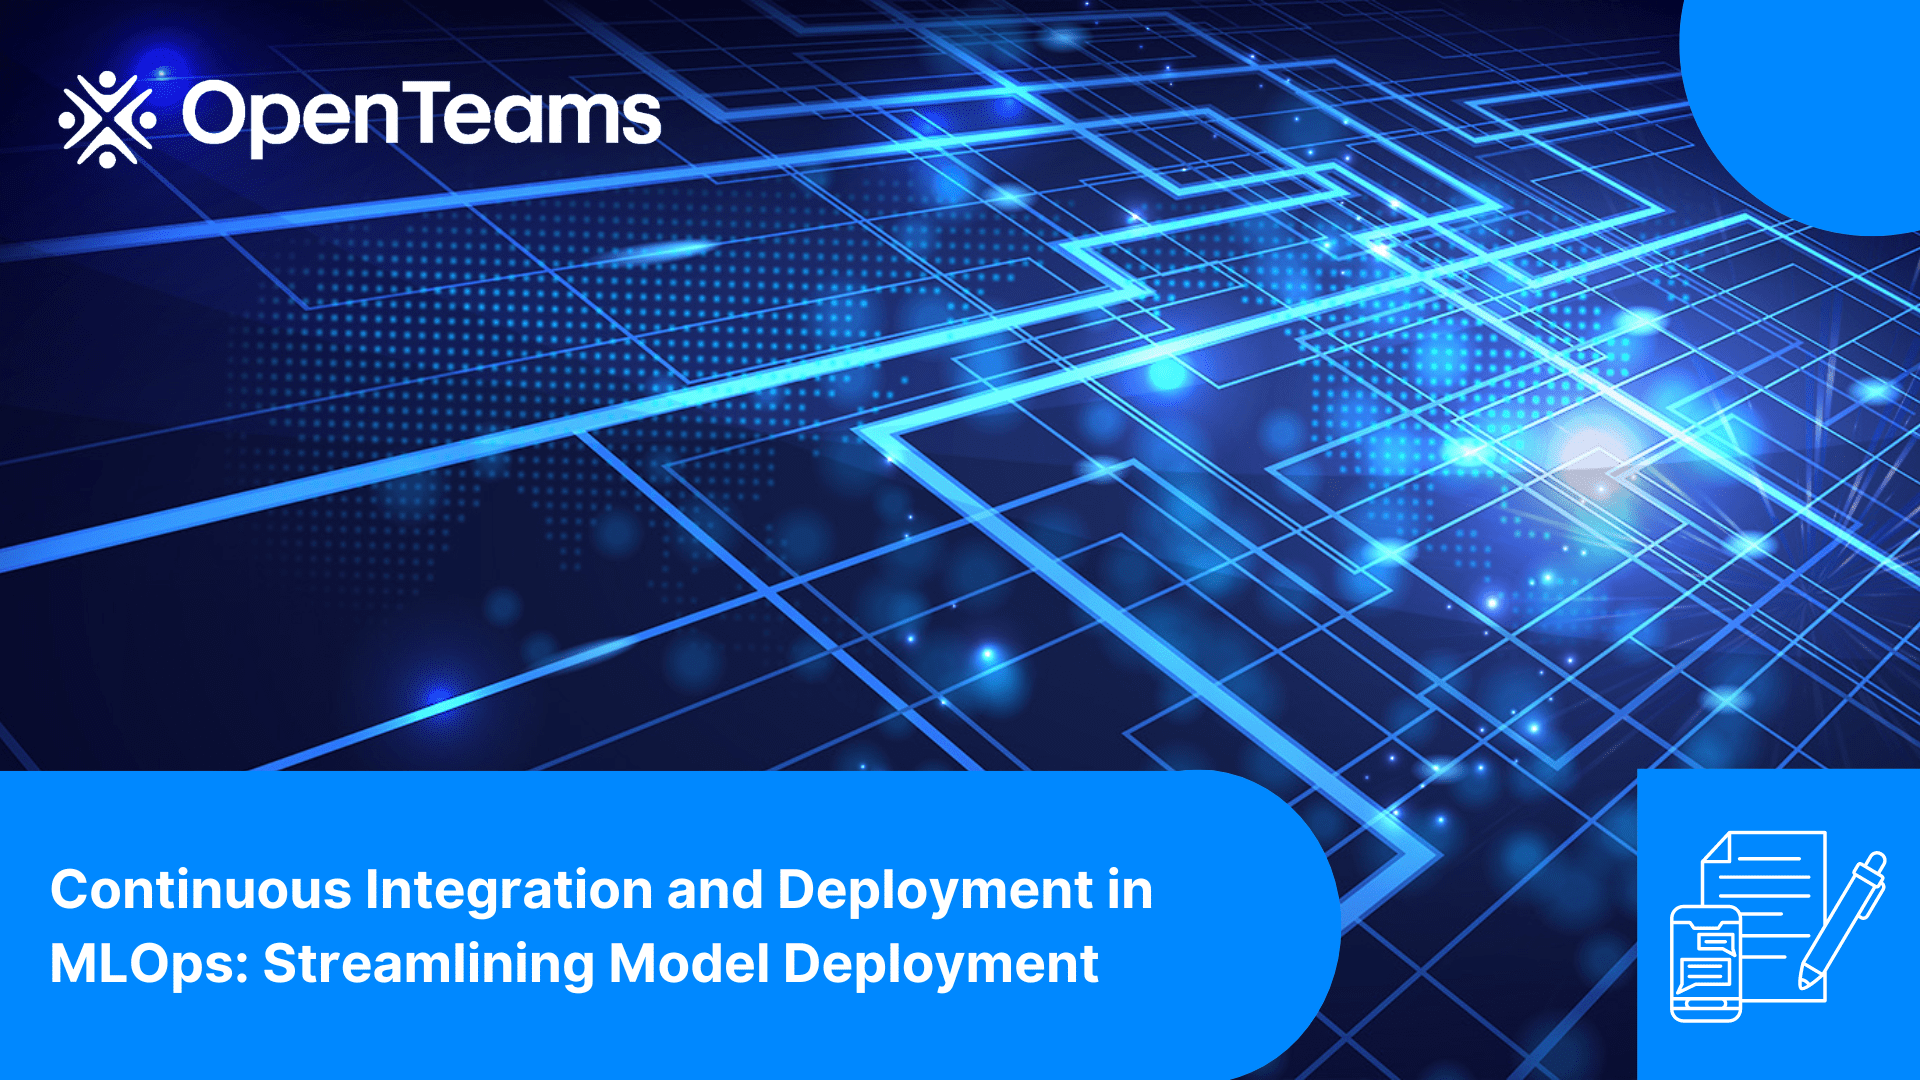 Continuous Integration and Deployment in MLOps: Streamlining Model Deployment